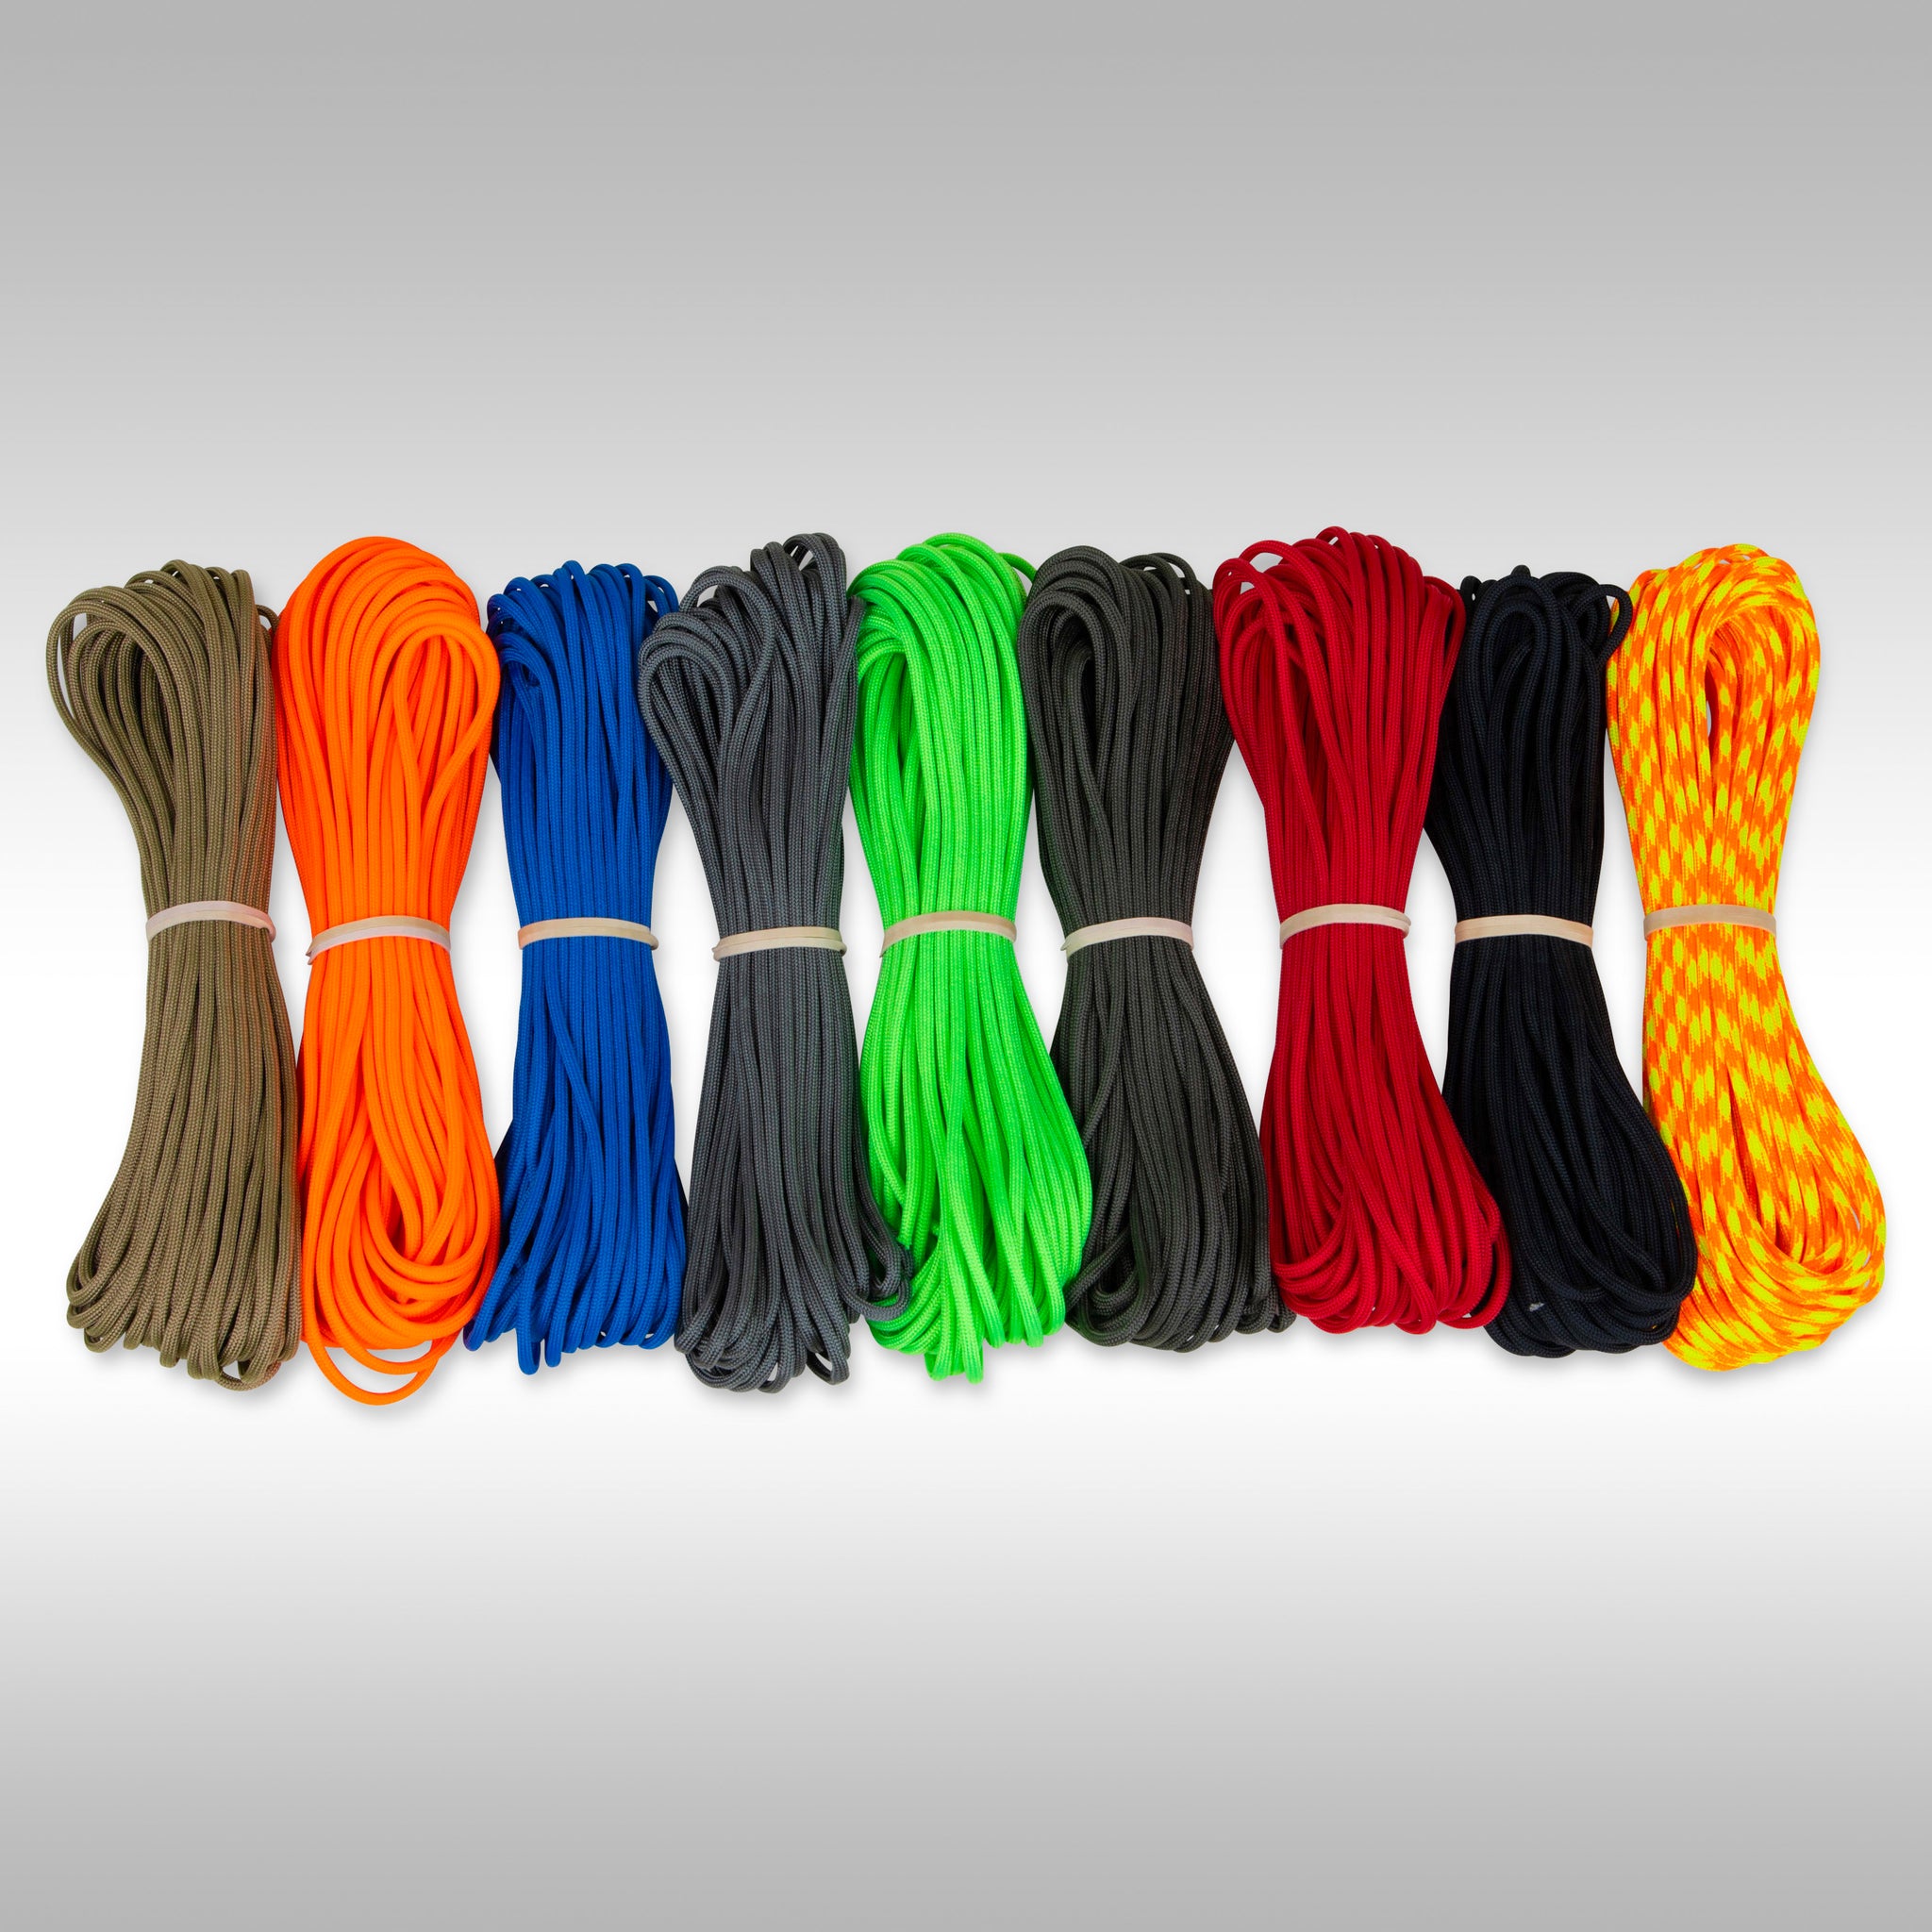 Buy Bulk Paracord Supplies For Sale From Best Online Store